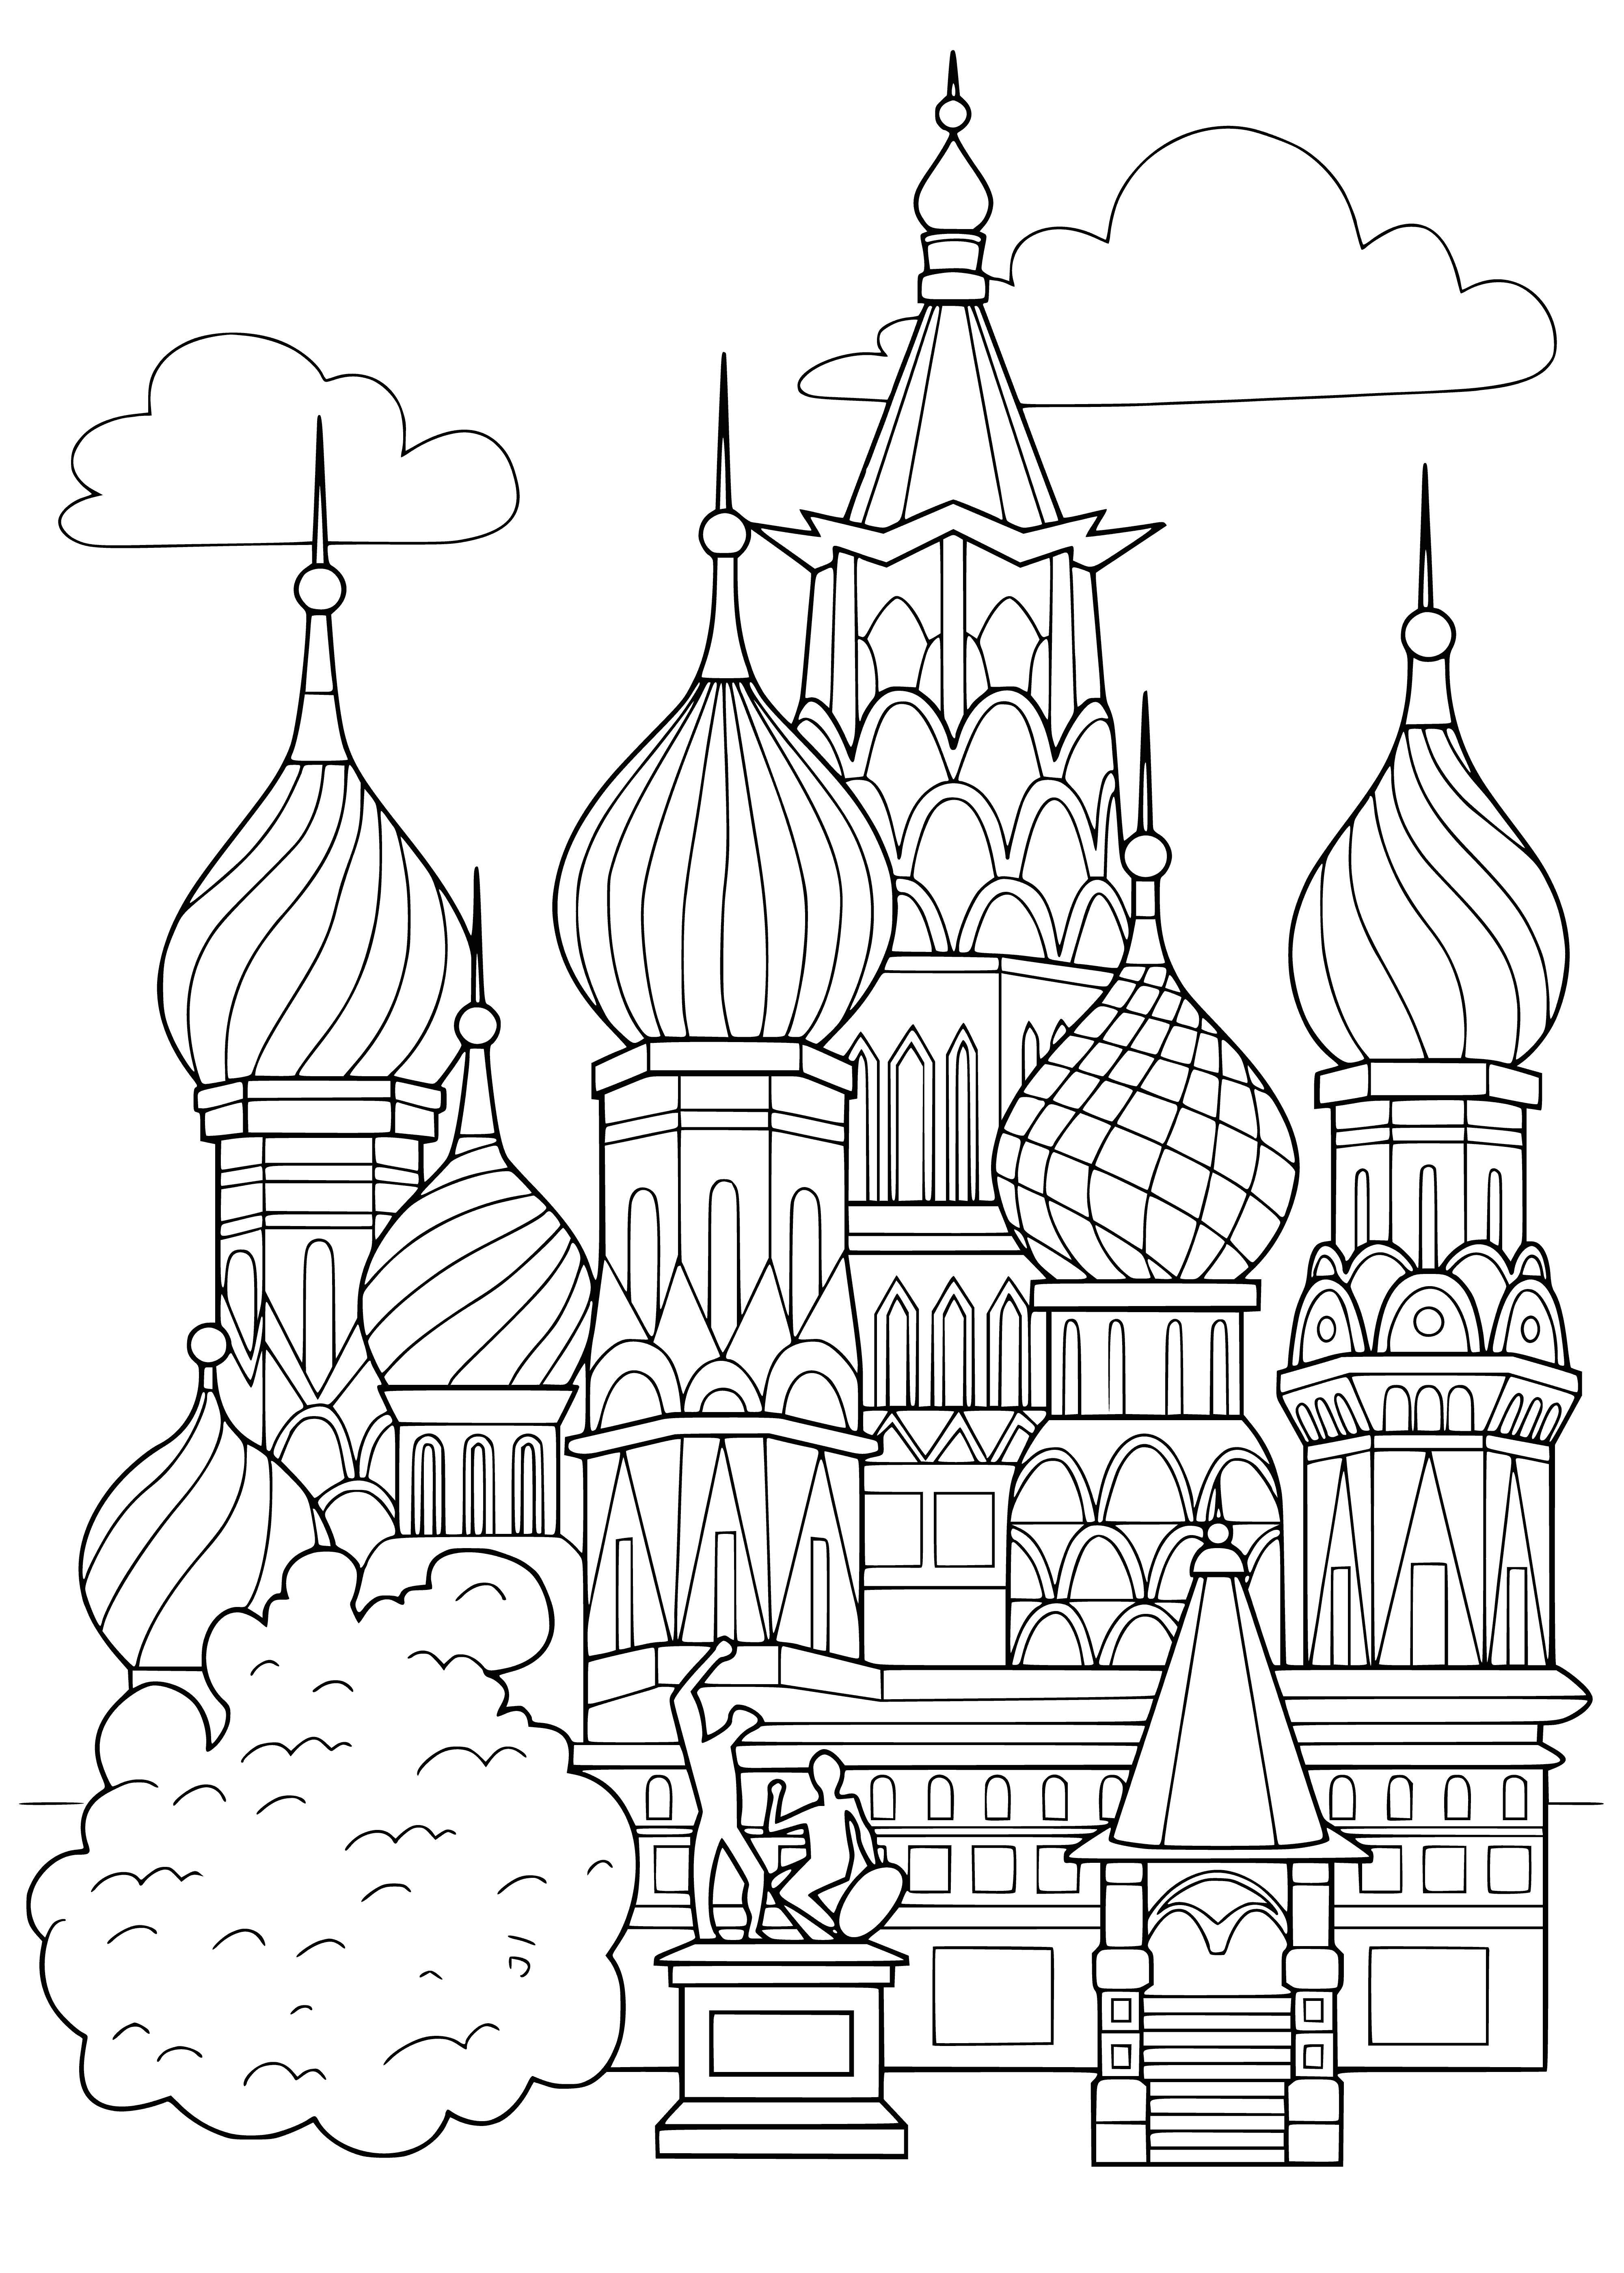 St. Basil's Cathedral in Moscow, Russia coloring page